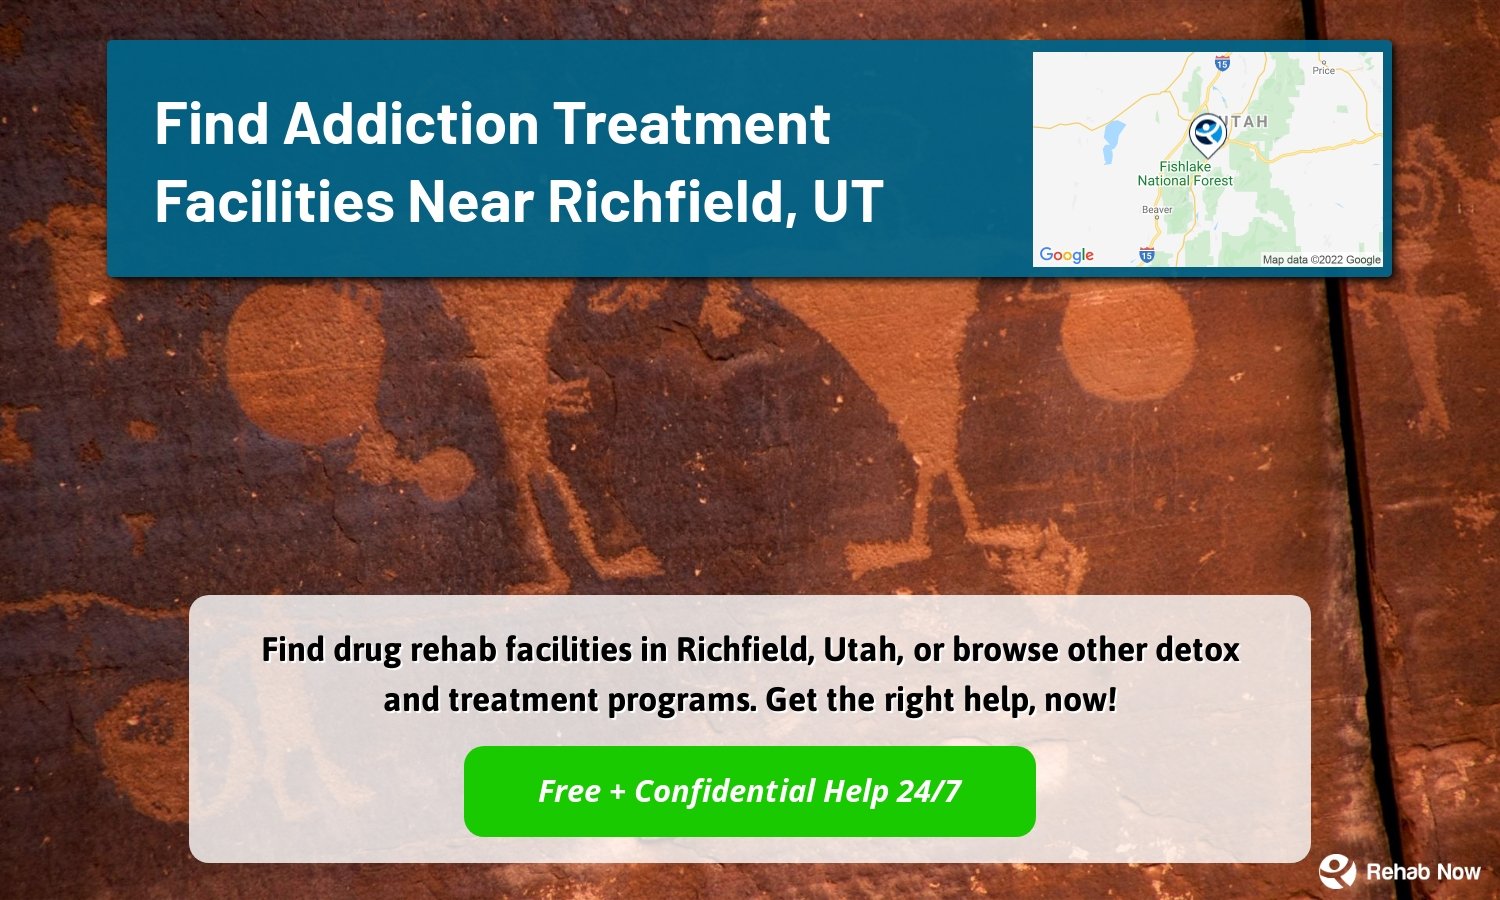 Find drug rehab facilities in Richfield, Utah, or browse other detox and treatment programs. Get the right help, now!